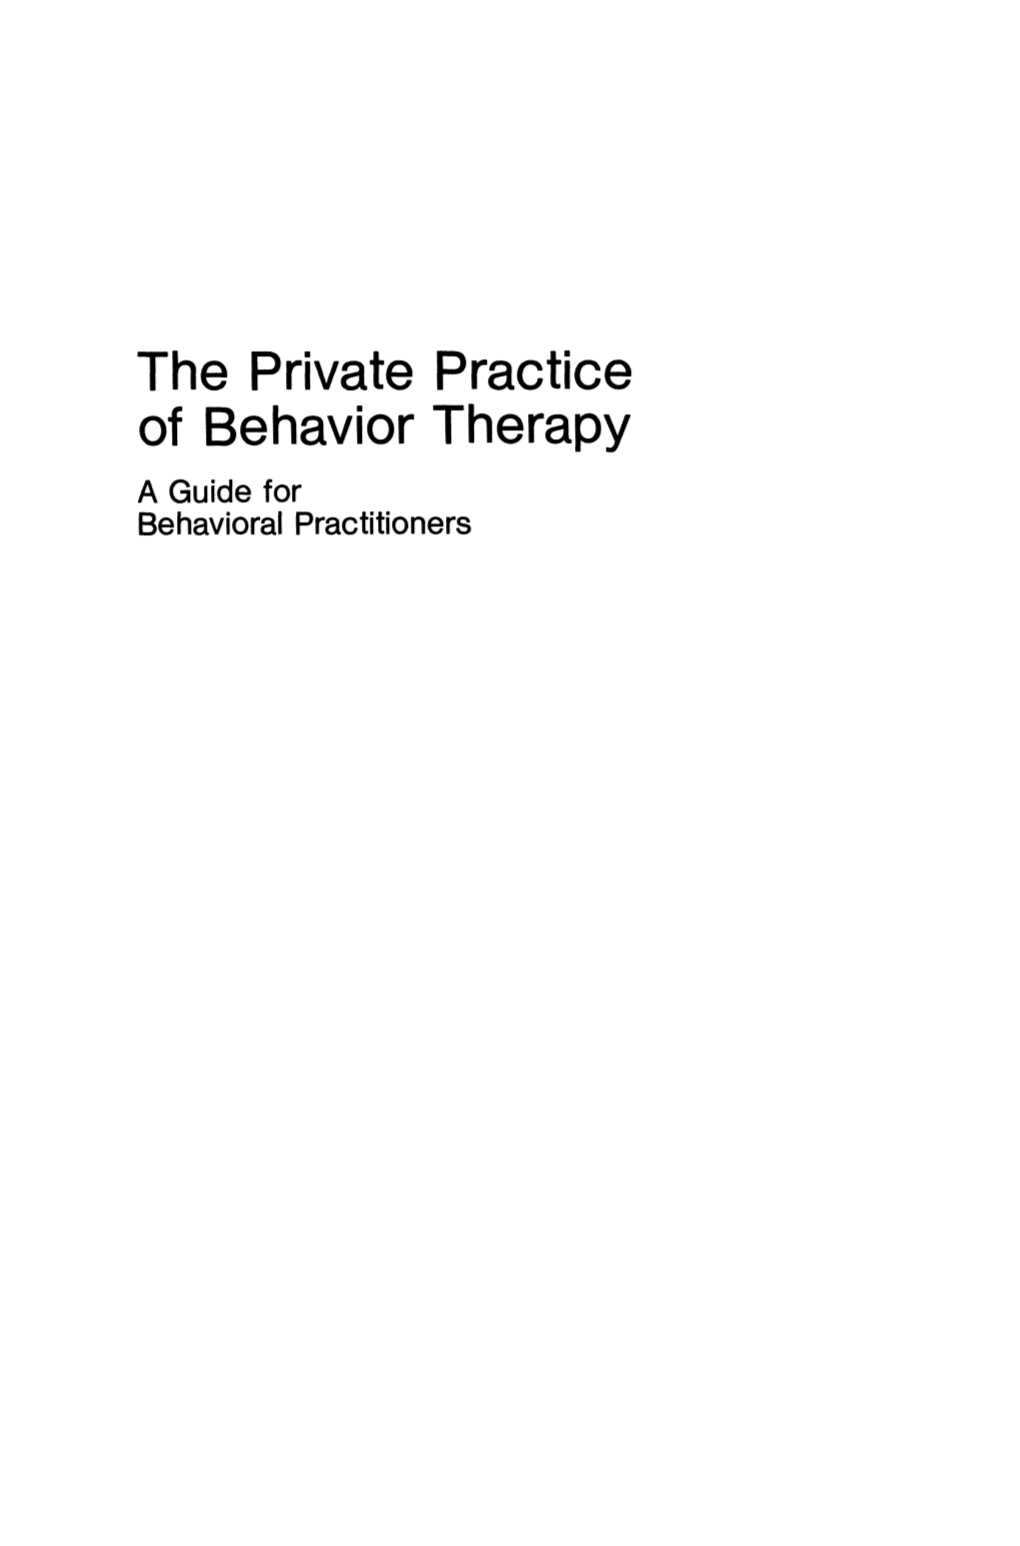 The Private Practice of Behavior Therapy a Guide for Behavioral Practitioners APPLIED CLINICAL PSYCHOLOGY Series Editors: Alan S